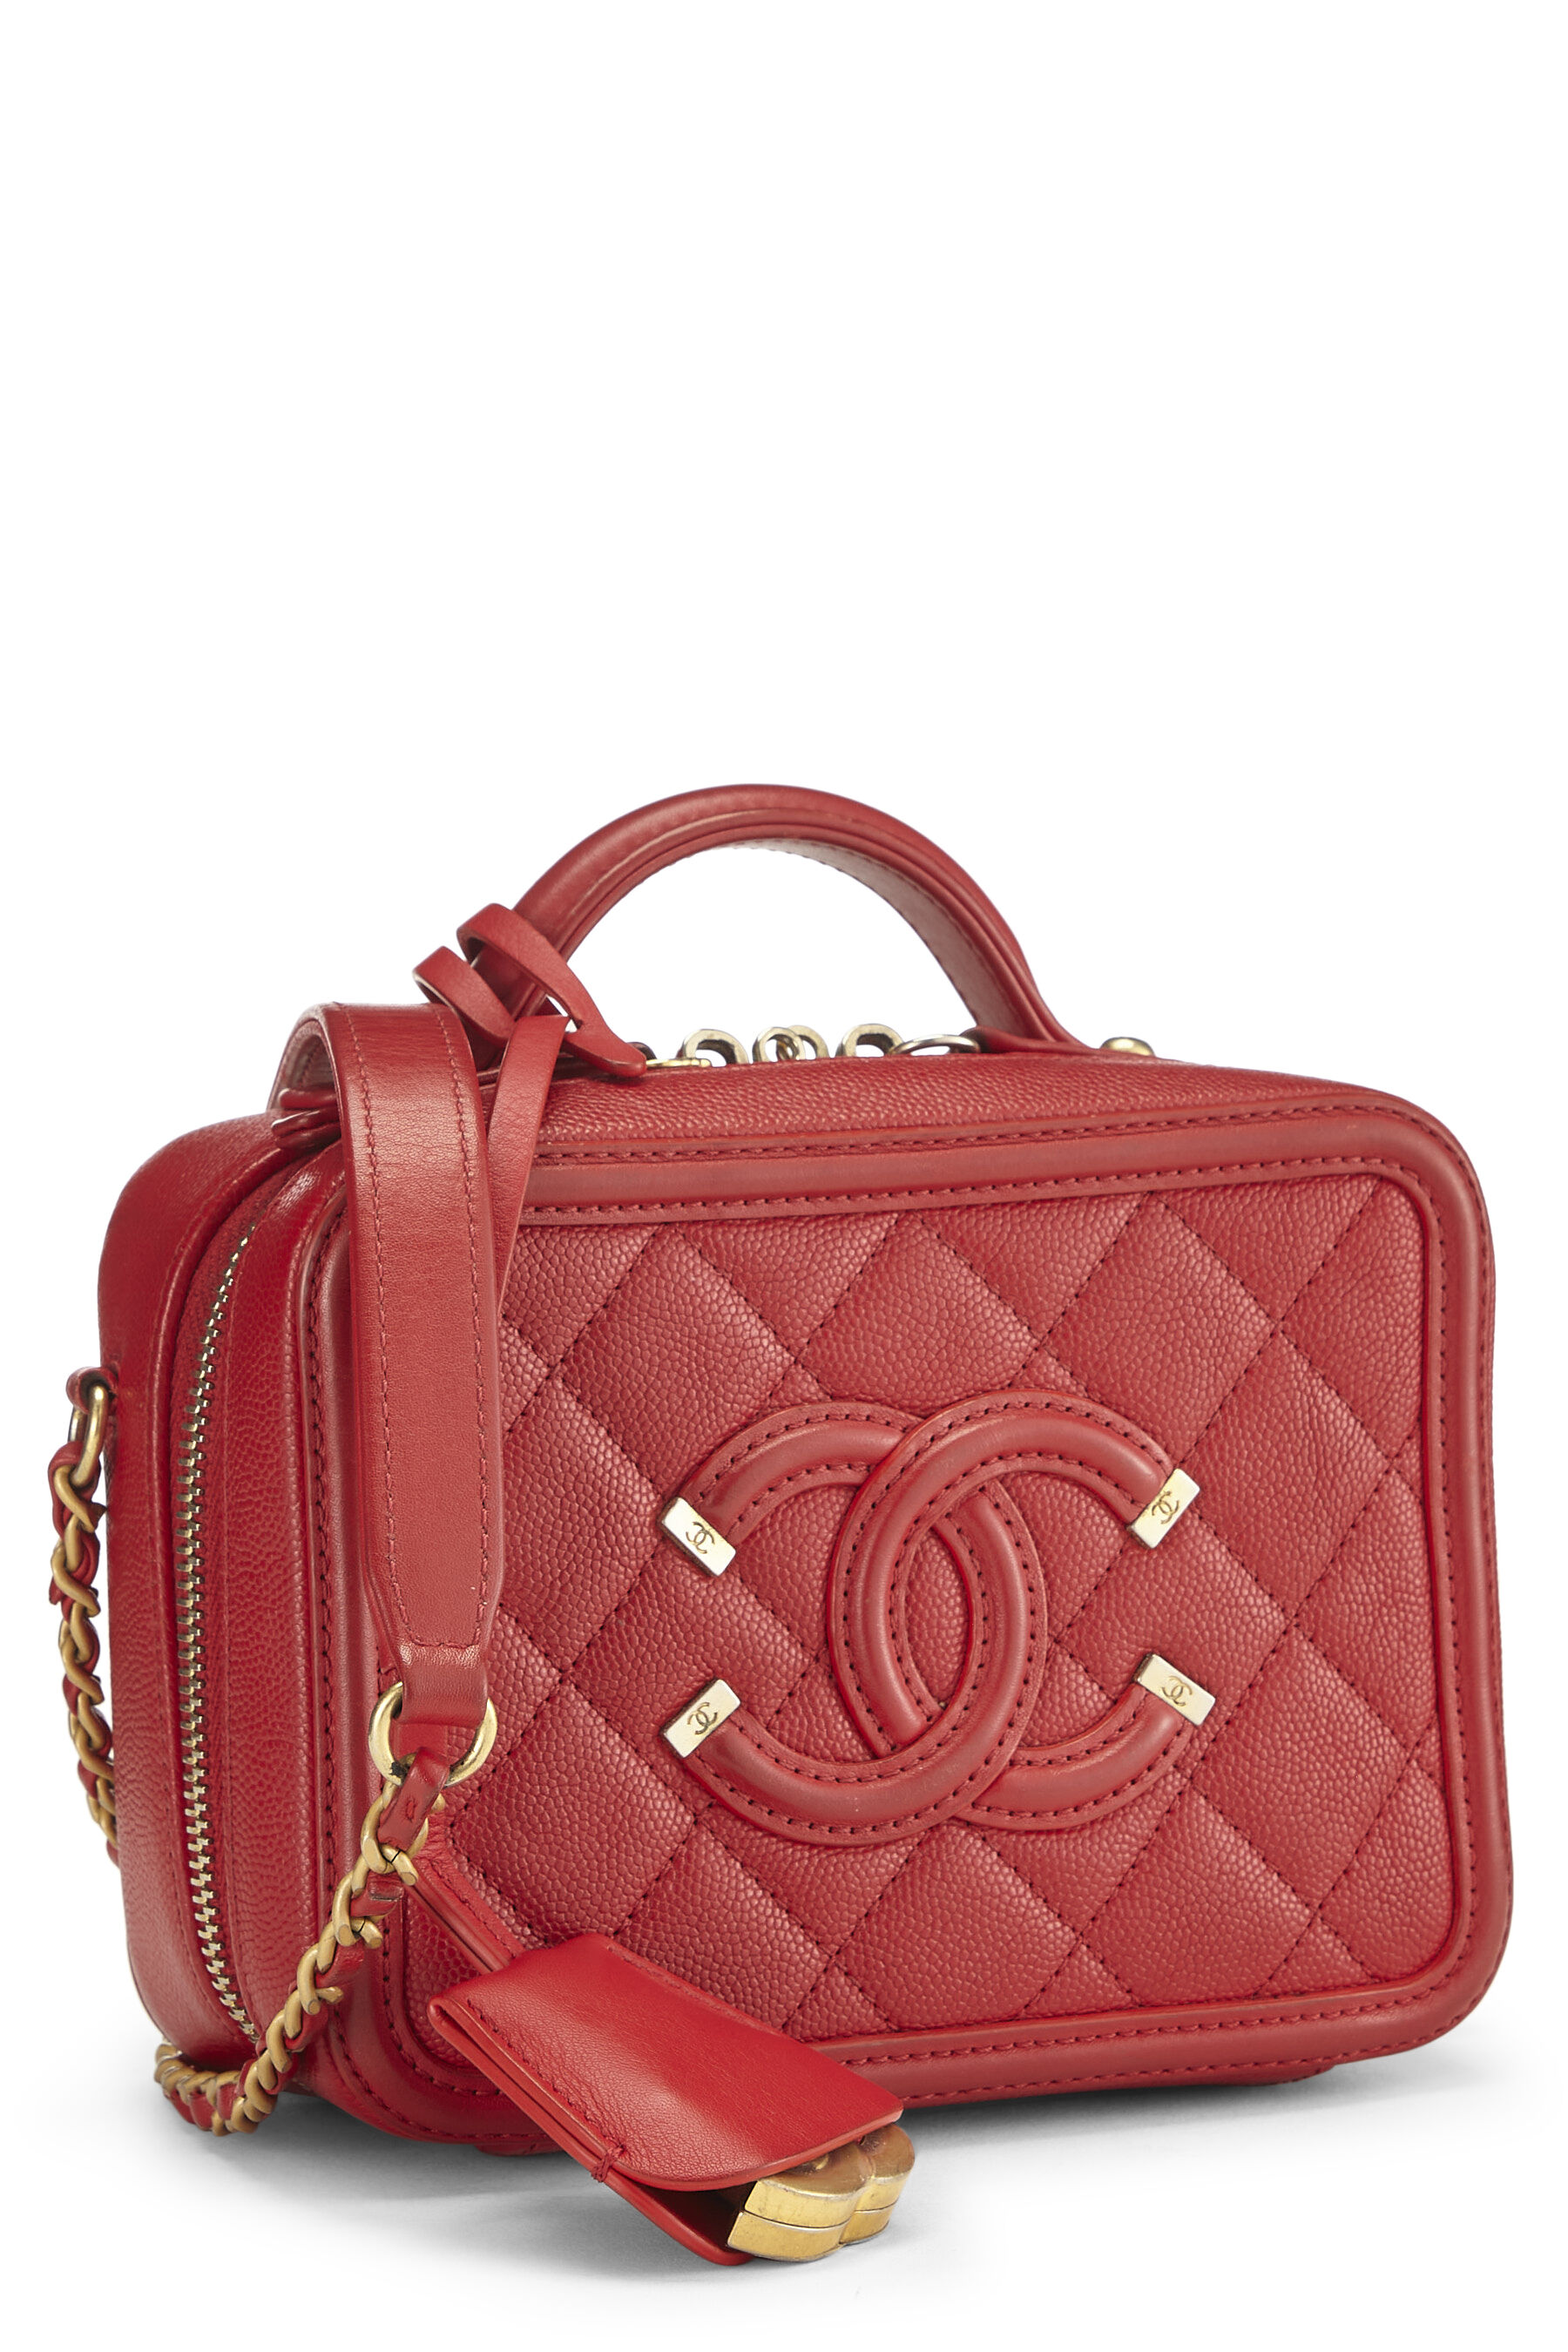 Chanel Small Filigree Vanity Case Red - ShopStyle Satchels & Top